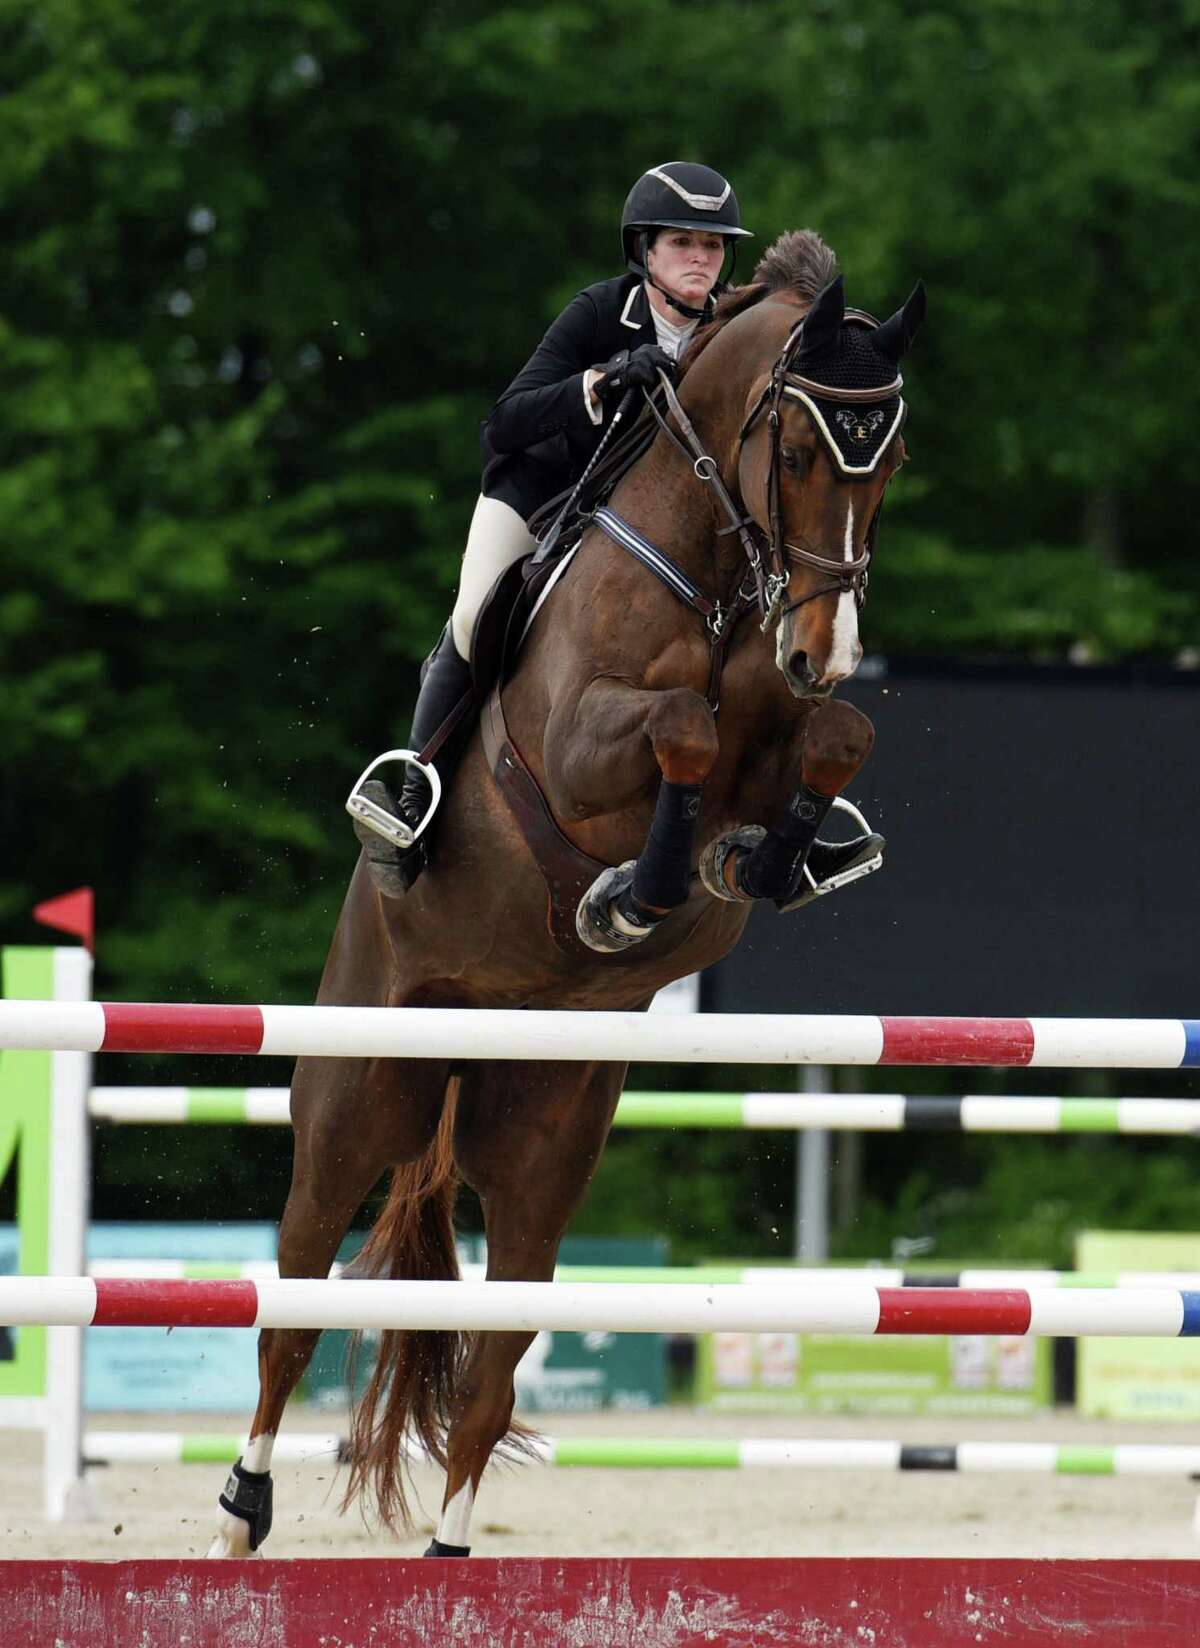 Megan Bash clears a jump with horse, Silver Spring, during the Skidmore College Saratoga Classic on Wednesday, June 19, 2019 at White Hollow Farm in Stillwater, NY. (Phoebe Sheehan/Times Union)